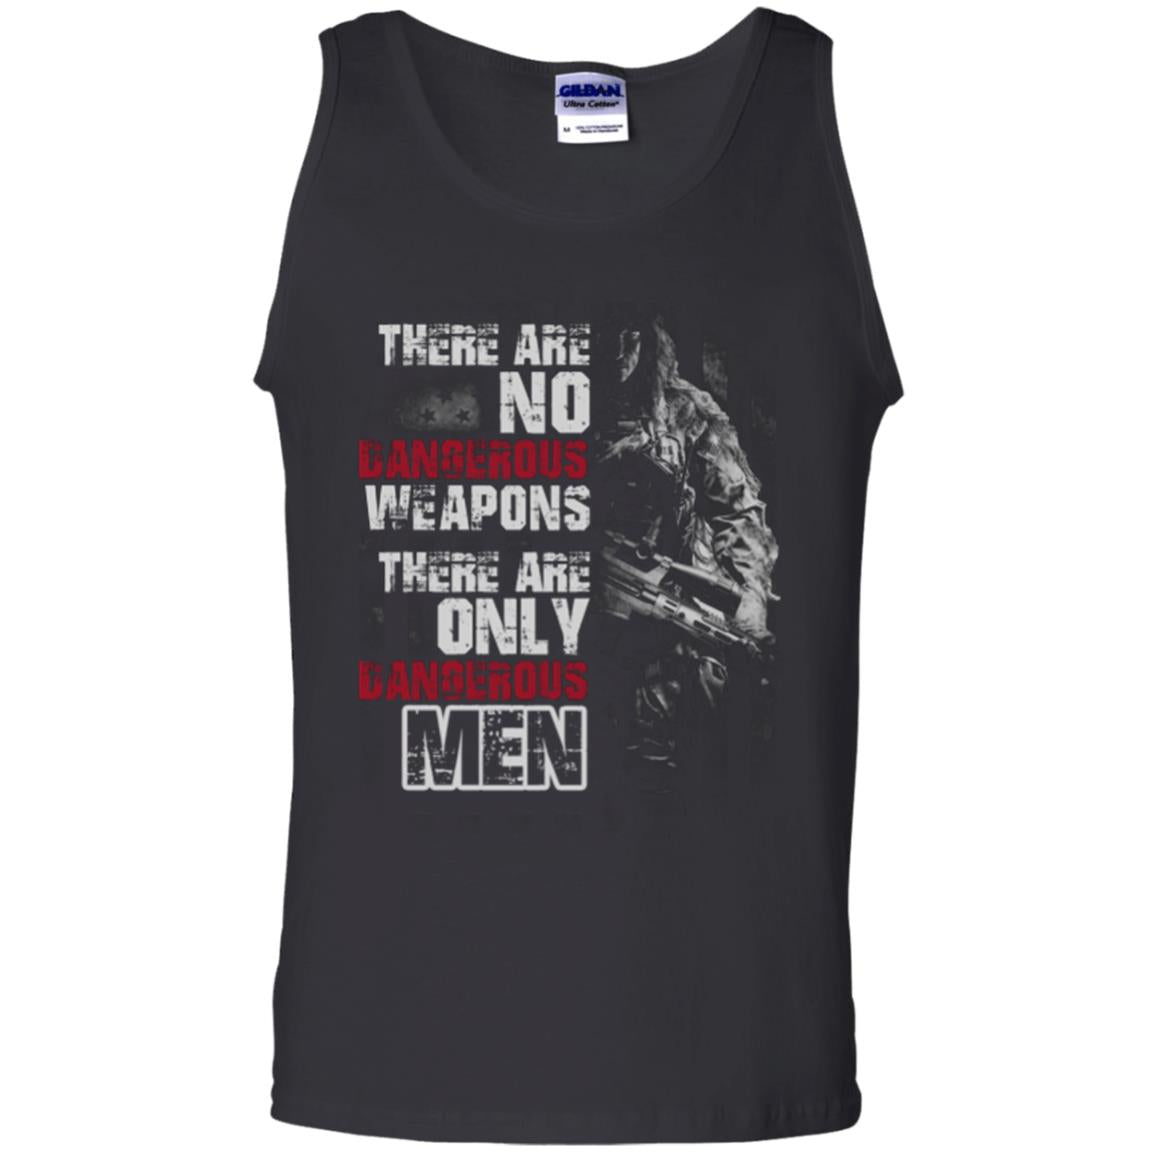 They Are No Dangerous Weapons There Are Only Dangerous Men Military Shirt